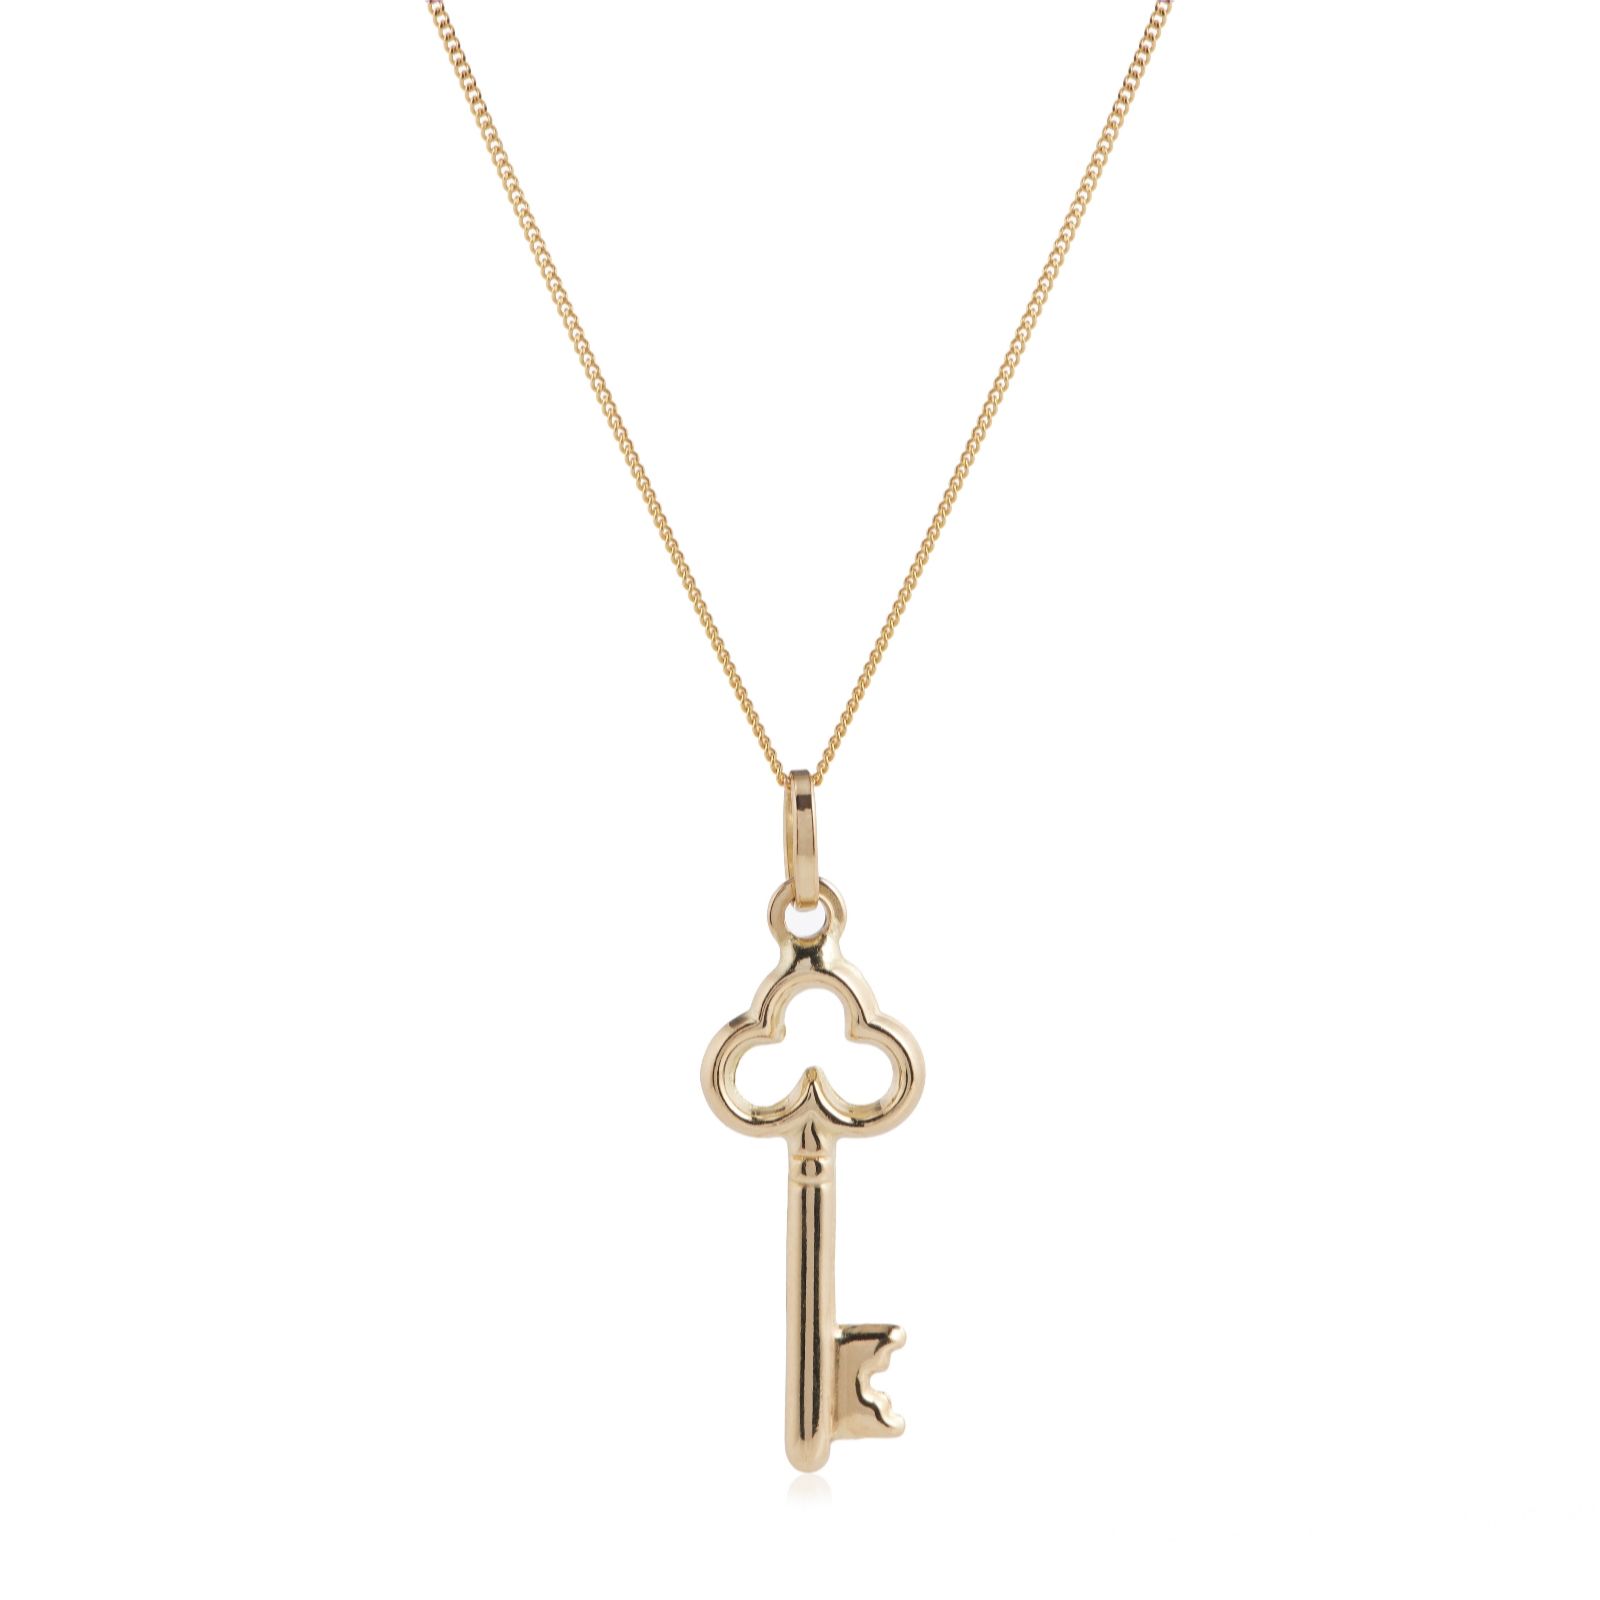 GOLD 9ct Key Chain Necklace 0.9g - QVC UK